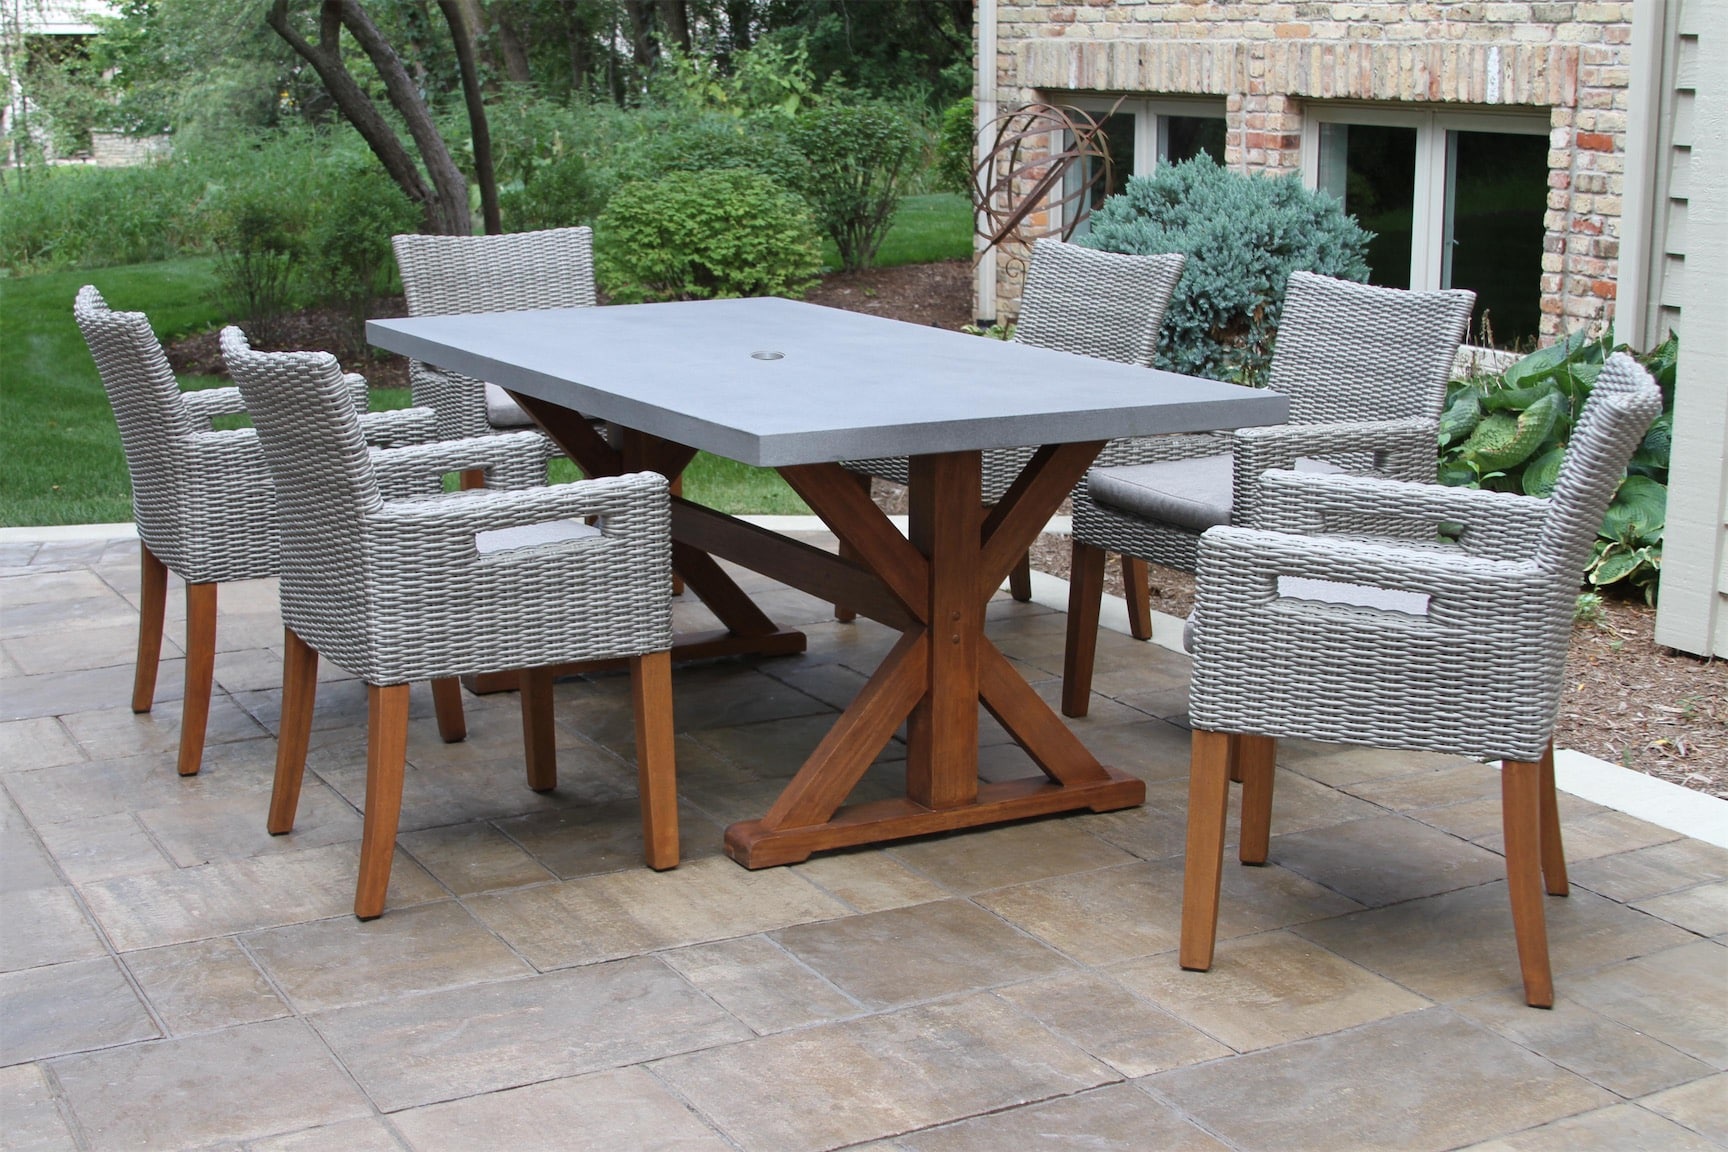 Outdoor Dining Sets: Different Styles to Choose From